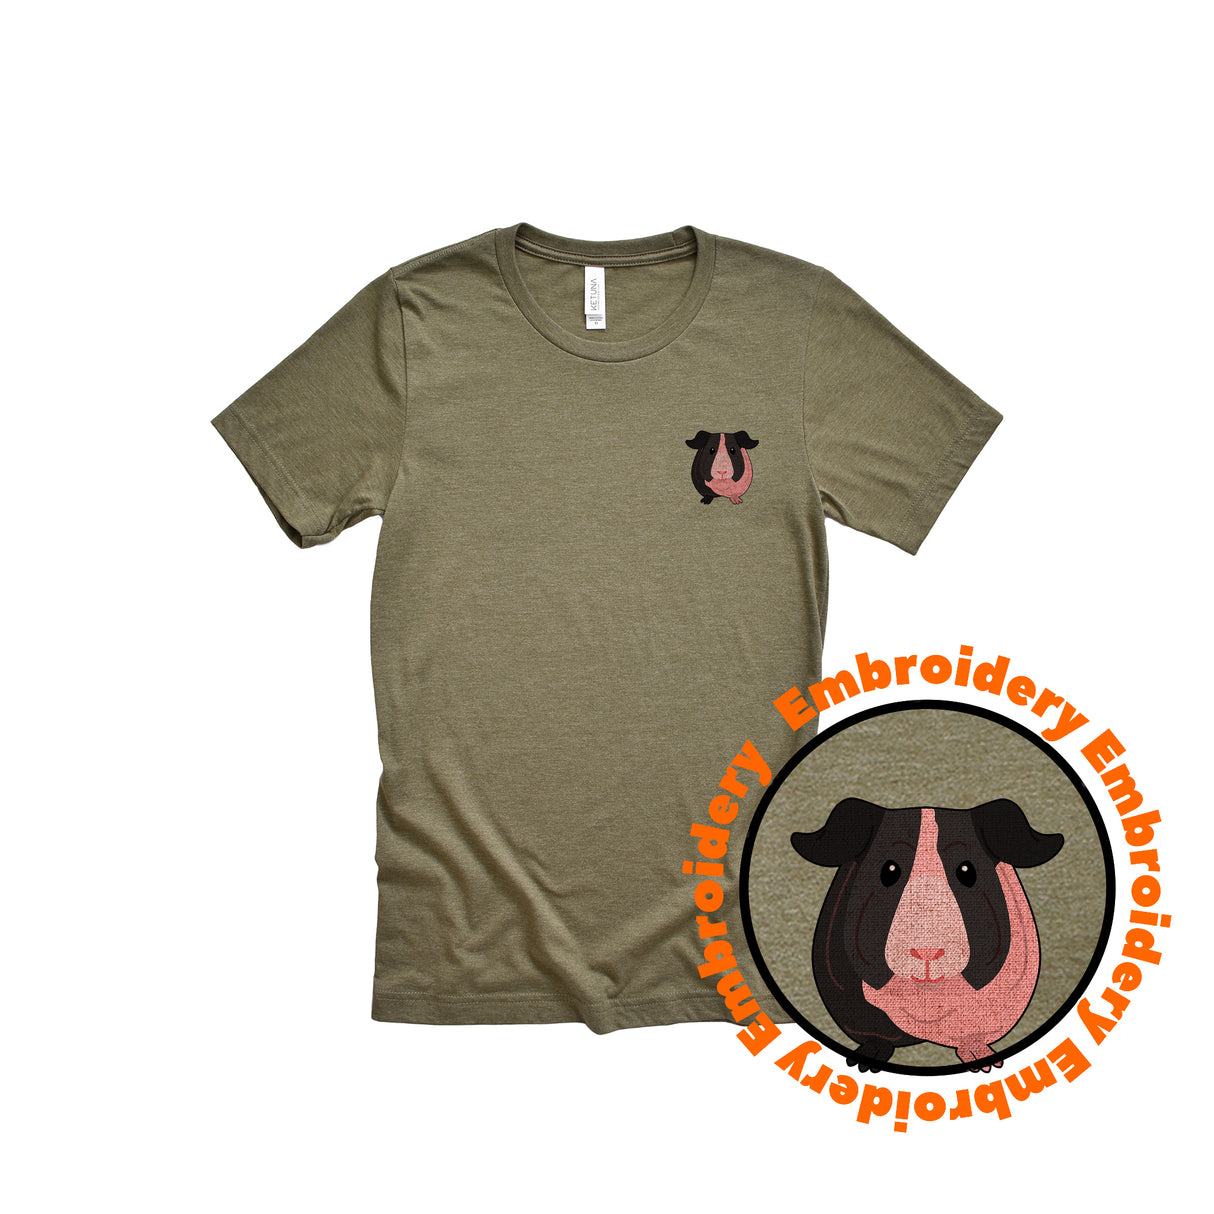 Guinea Pig Embroidery Unisex Adult T-Shirt